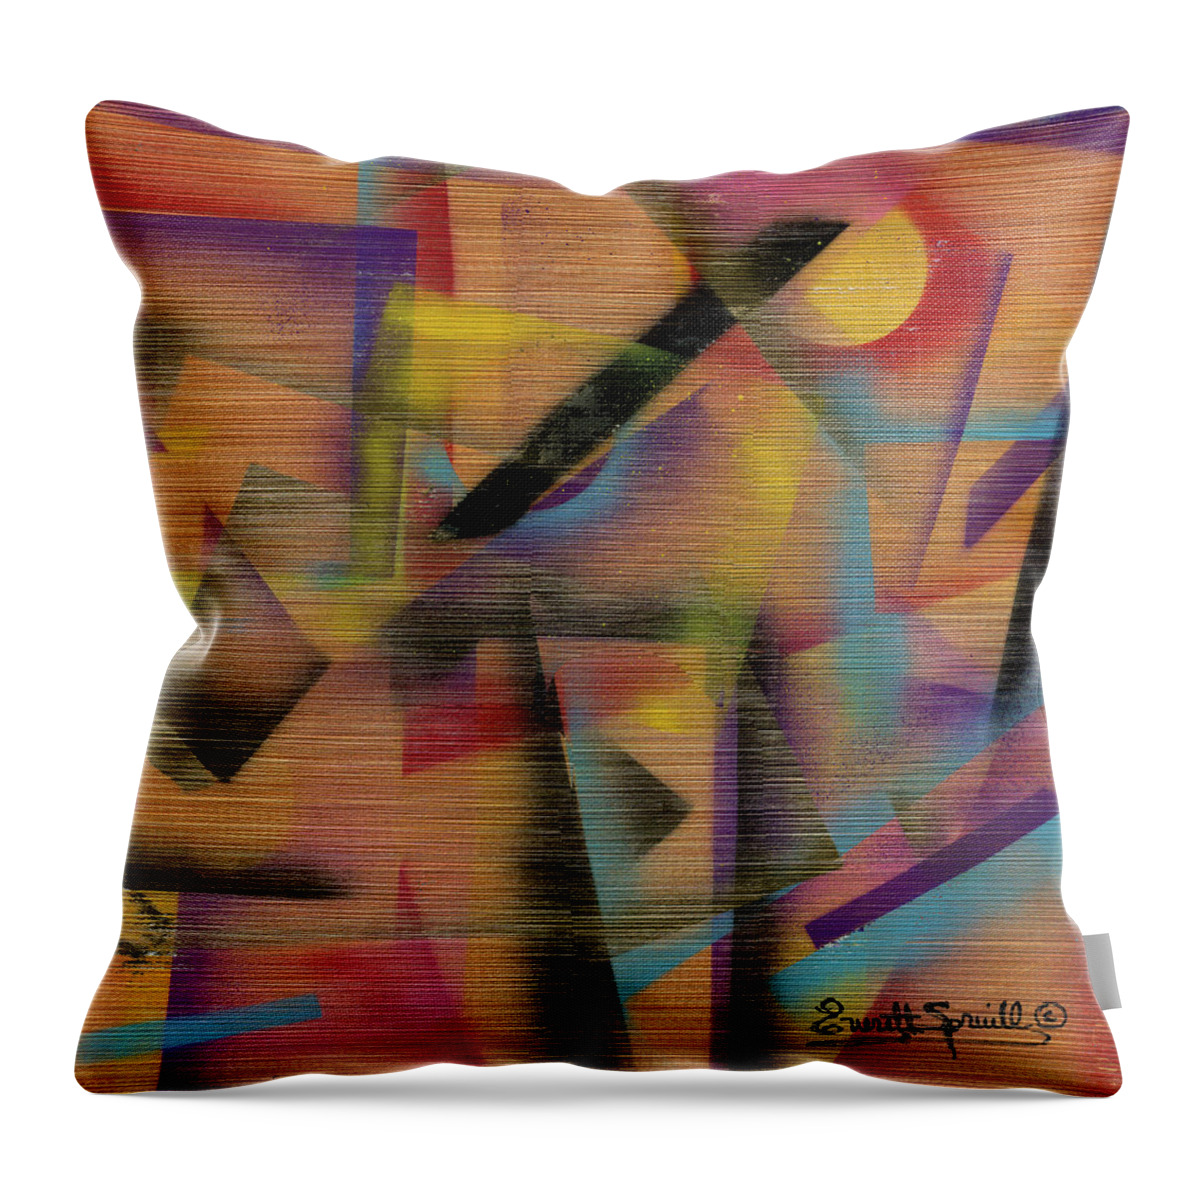 Everett Spruill Throw Pillow featuring the painting Juxtaposition - c by Everett Spruill